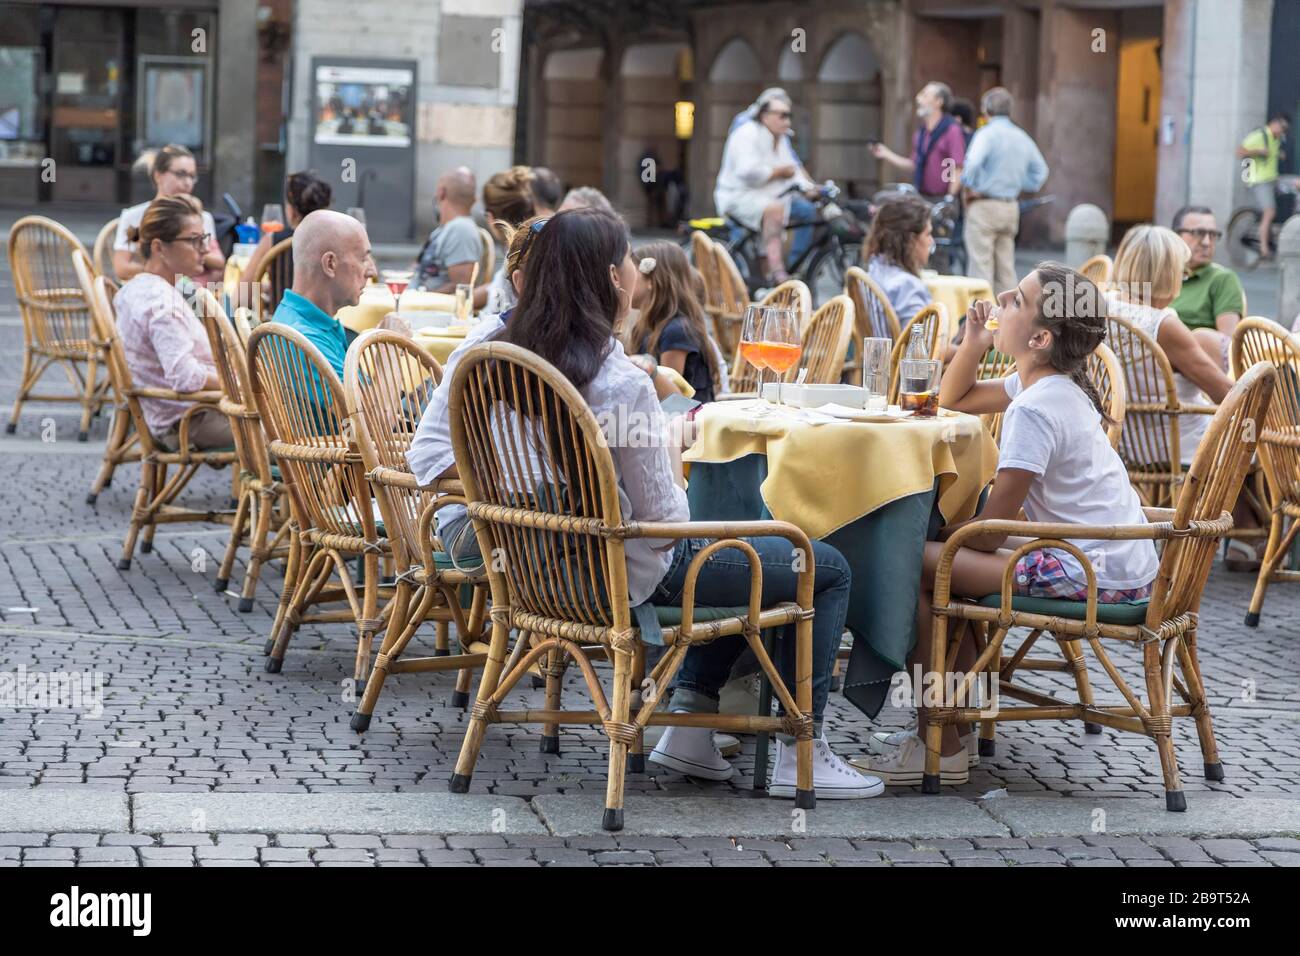 CREMONA, ITALY - SEPTEMBER 02, 2015: People sit at little tables in street cafe on Piazza del Comune in Cremona. Italy Stock Photo